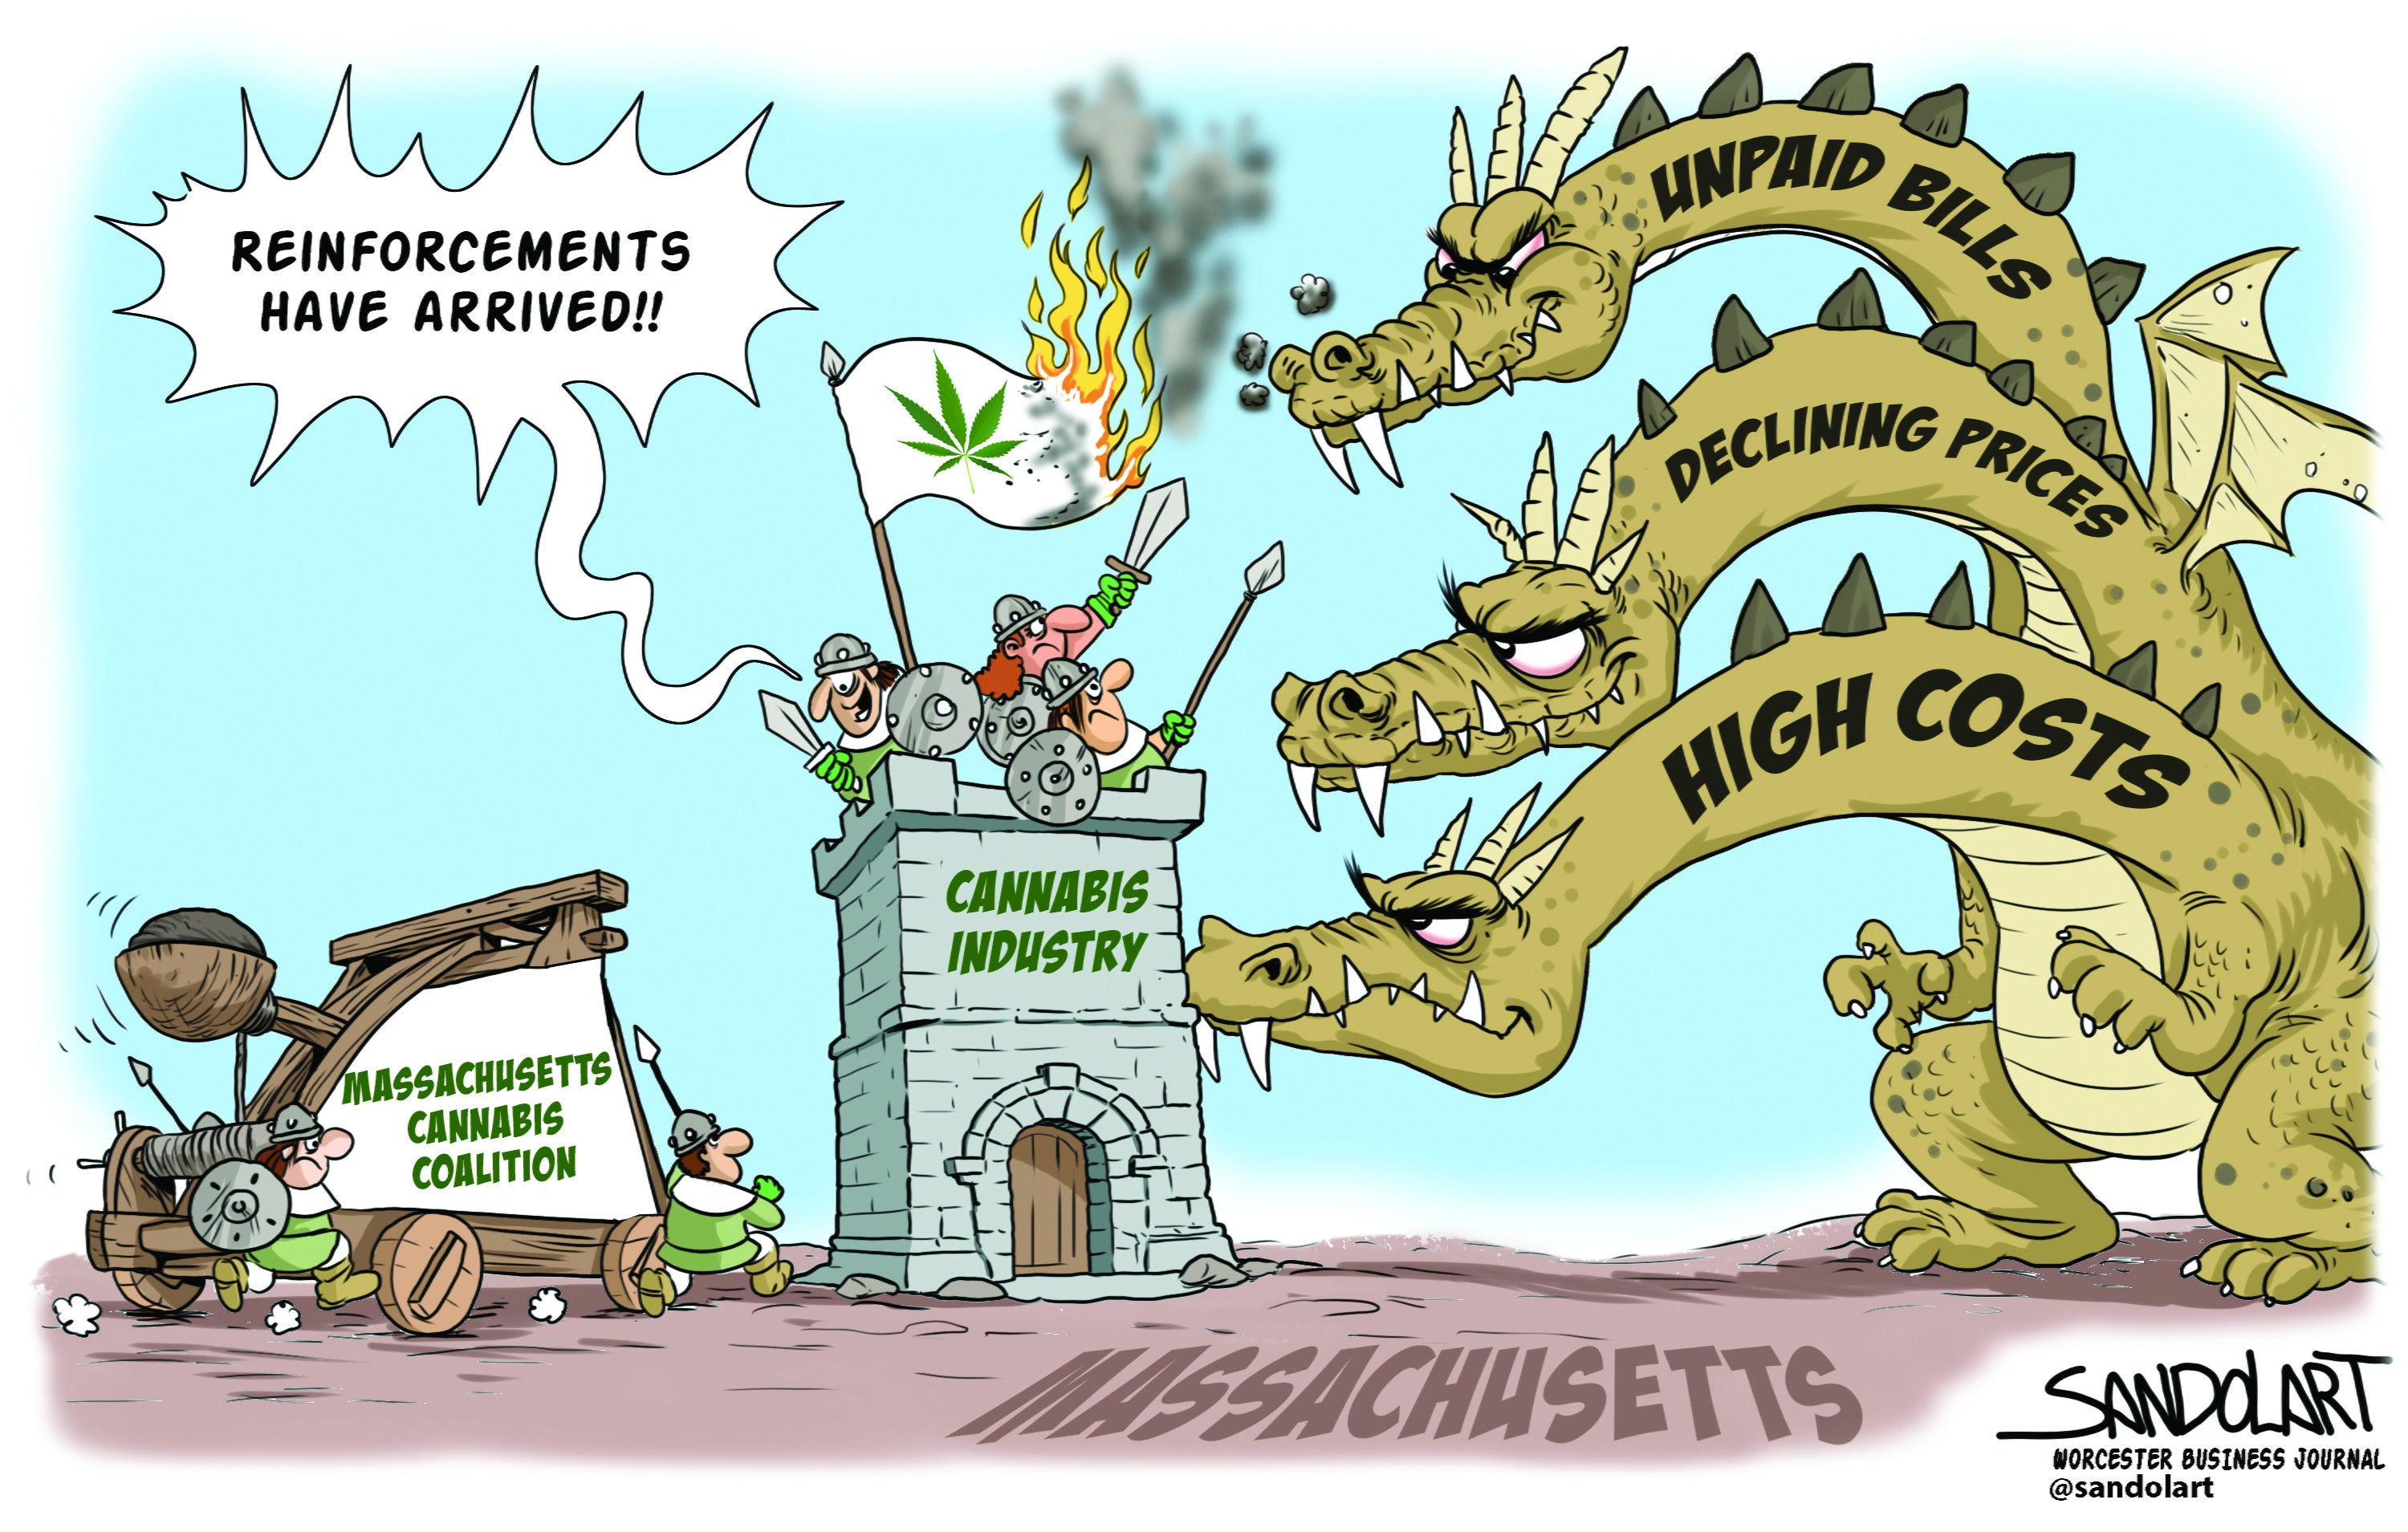 Knights in a tower representing current players in the Massachusetts cannabis industry are reinforced by a new association with a catapult, as they all fight off a three-headed dragon causing the industry problems.